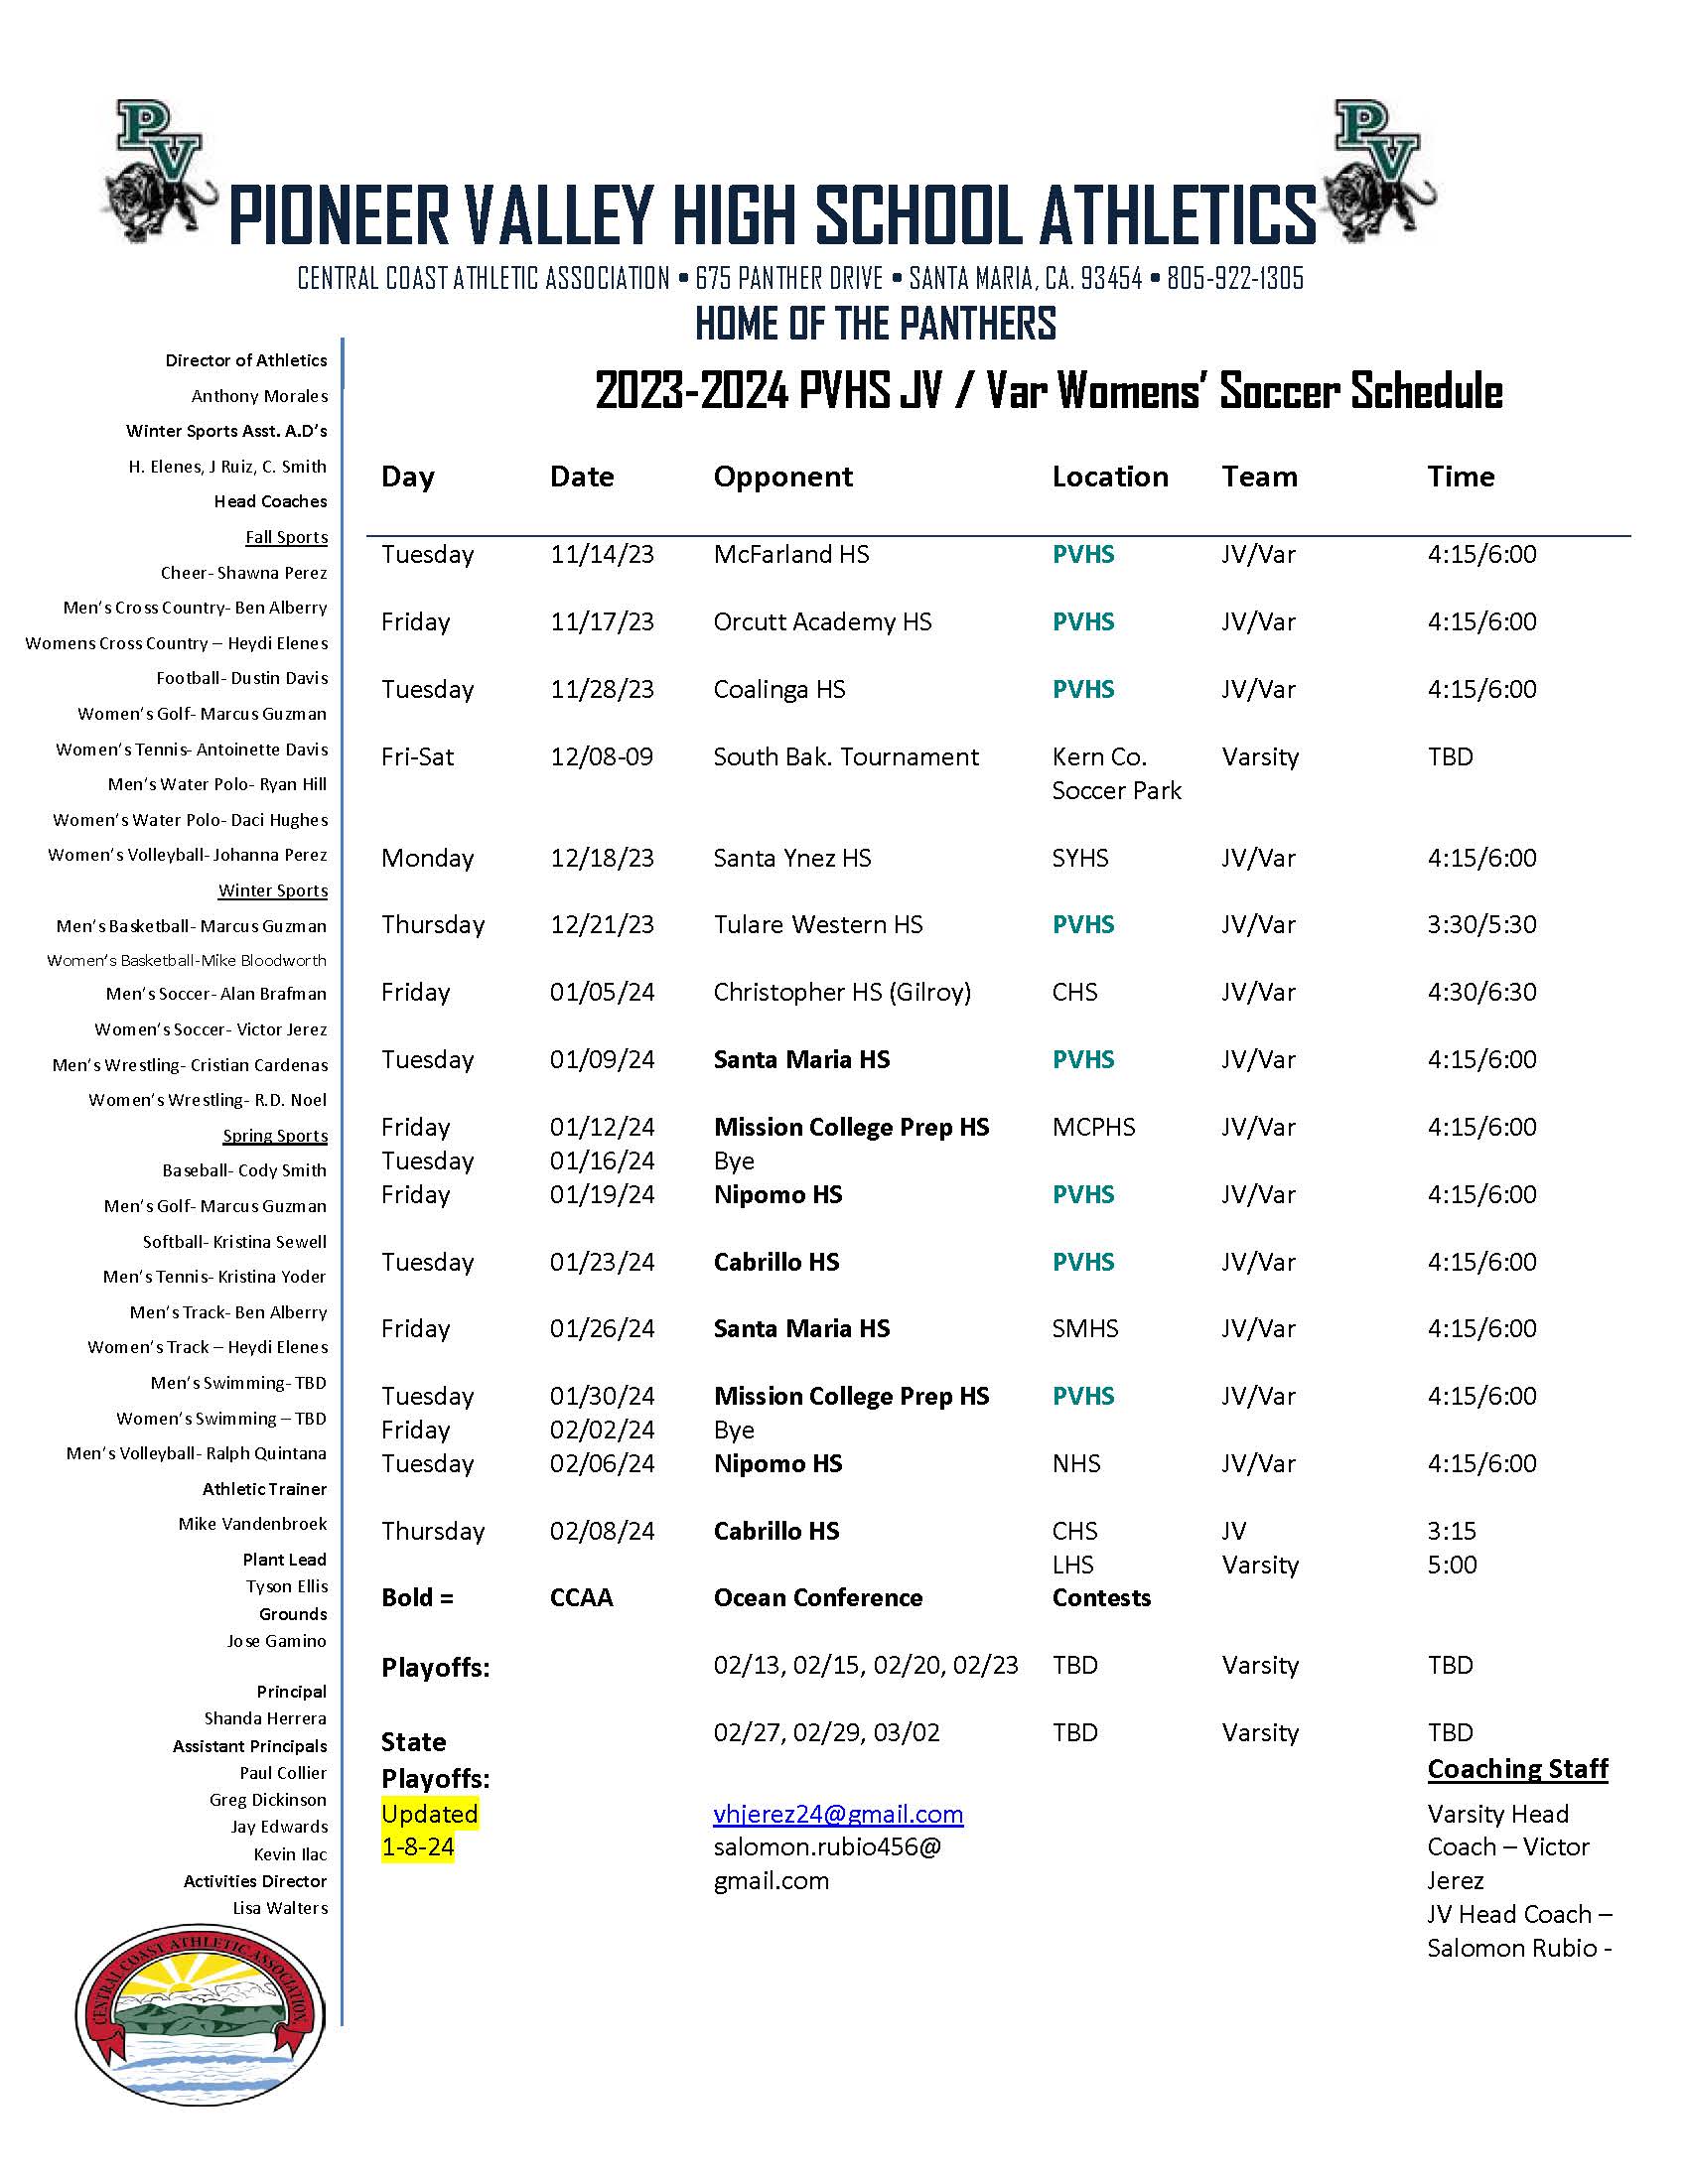 Womens Soccer Sched ver 2